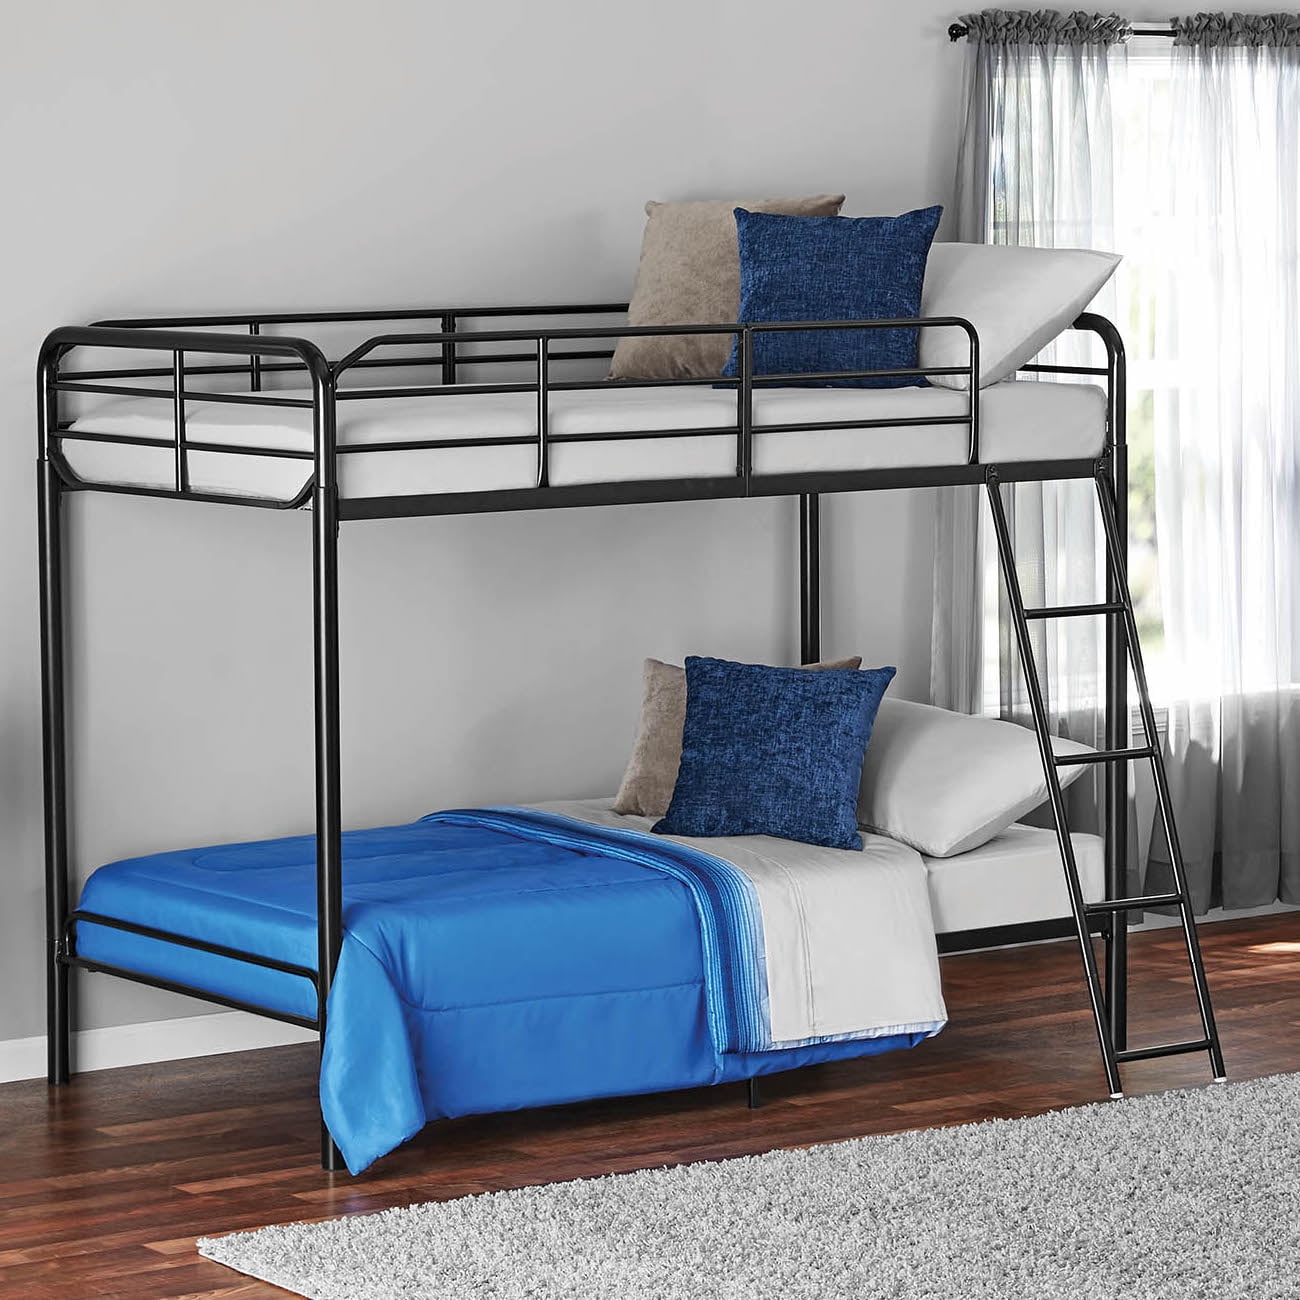 Mainstays Twin Over Metal Bunk Bed, Metal Bunk Beds Twin Over Twin